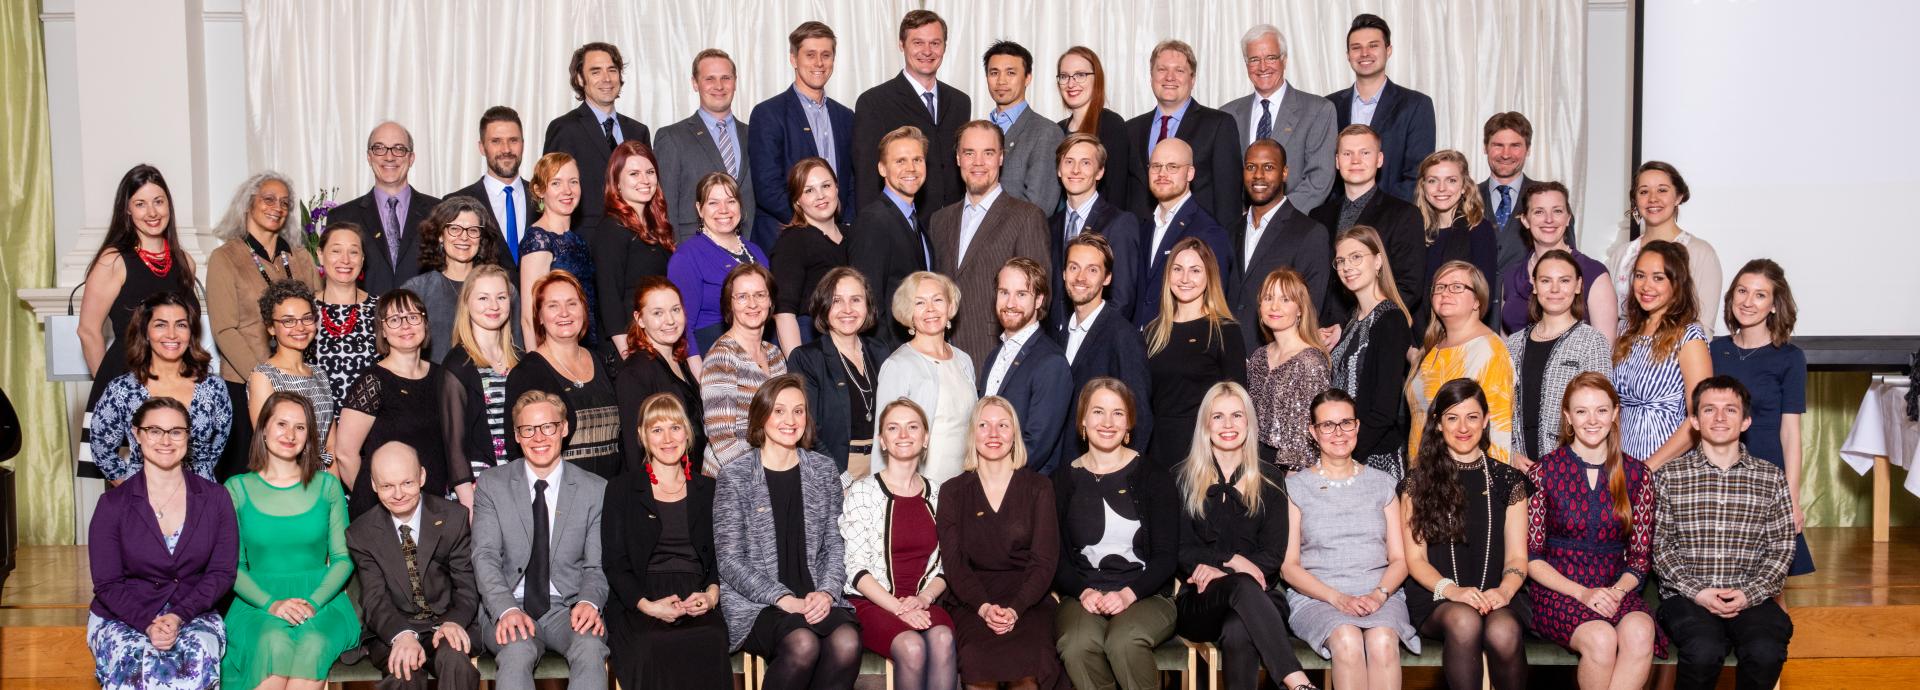 Fulbright Finland Foundation Grantees at the Fulbright Finland Award Ceremony and Reception in May 2019